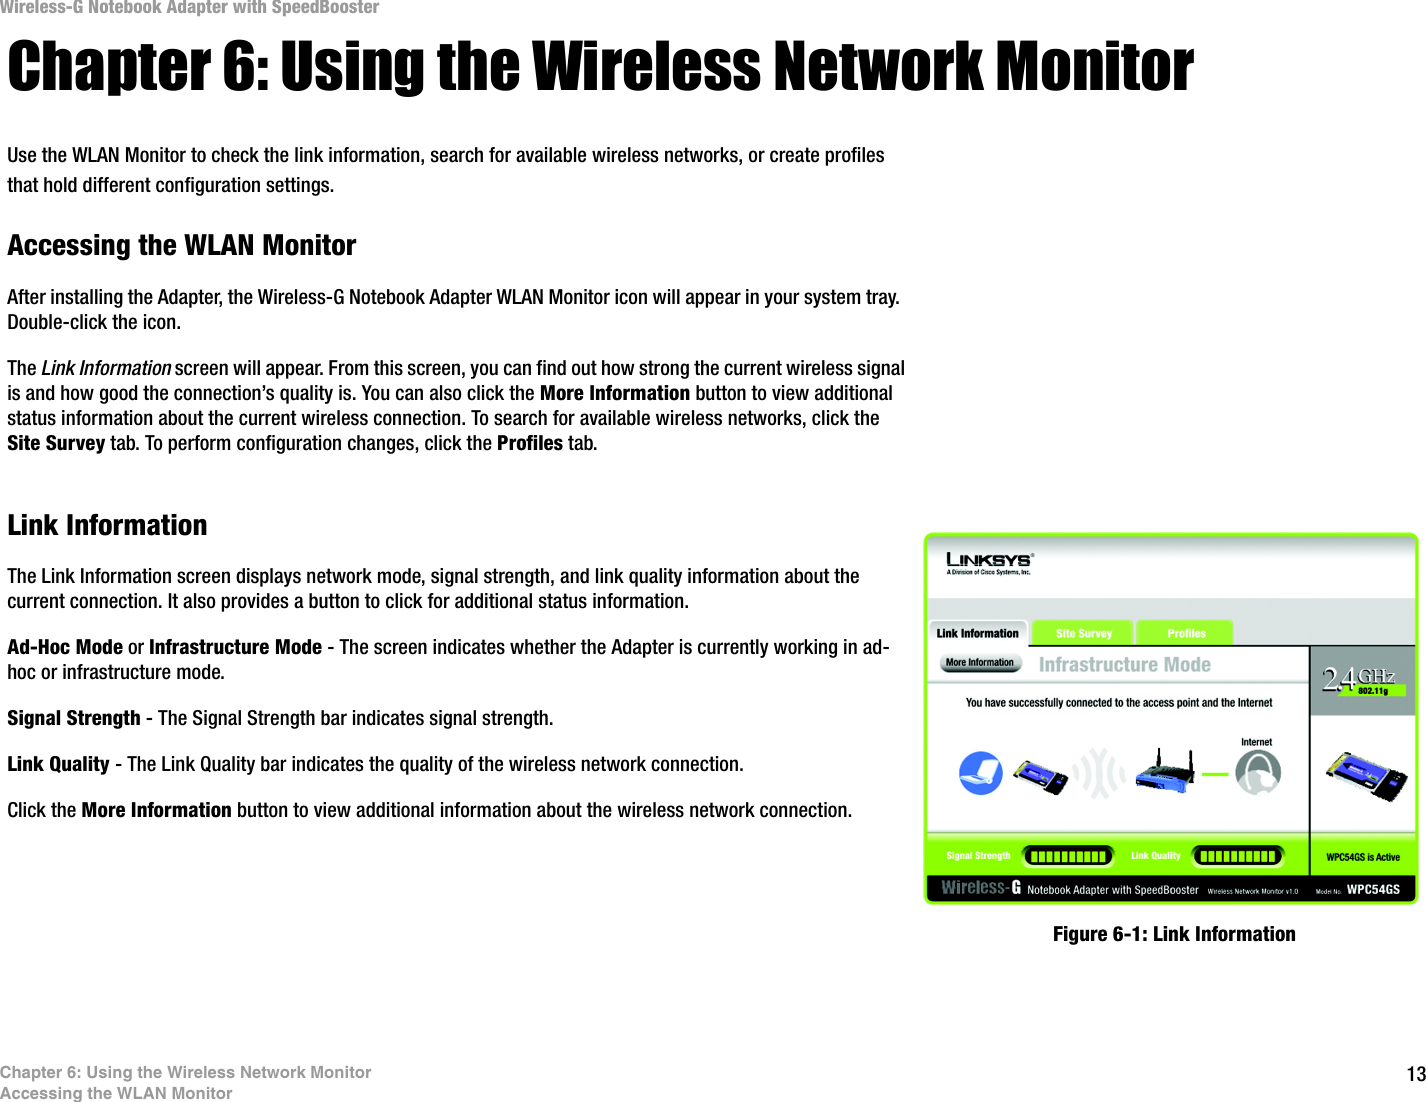 13Chapter 6: Using the Wireless Network MonitorAccessing the WLAN MonitorWireless-G Notebook Adapter with SpeedBoosterChapter 6: Using the Wireless Network MonitorUse the WLAN Monitor to check the link information, search for available wireless networks, or create profiles that hold different configuration settings.Accessing the WLAN MonitorAfter installing the Adapter, the Wireless-G Notebook Adapter WLAN Monitor icon will appear in your system tray.  Double-click the icon.The Link Information screen will appear. From this screen, you can find out how strong the current wireless signal is and how good the connection’s quality is. You can also click the More Information button to view additional status information about the current wireless connection. To search for available wireless networks, click the Site Survey tab. To perform configuration changes, click the Profiles tab.Link InformationThe Link Information screen displays network mode, signal strength, and link quality information about the current connection. It also provides a button to click for additional status information.  Ad-Hoc Mode or Infrastructure Mode - The screen indicates whether the Adapter is currently working in ad-hoc or infrastructure mode.Signal Strength - The Signal Strength bar indicates signal strength. Link Quality - The Link Quality bar indicates the quality of the wireless network connection.Click the More Information button to view additional information about the wireless network connection.  Figure 6-1: Link Information